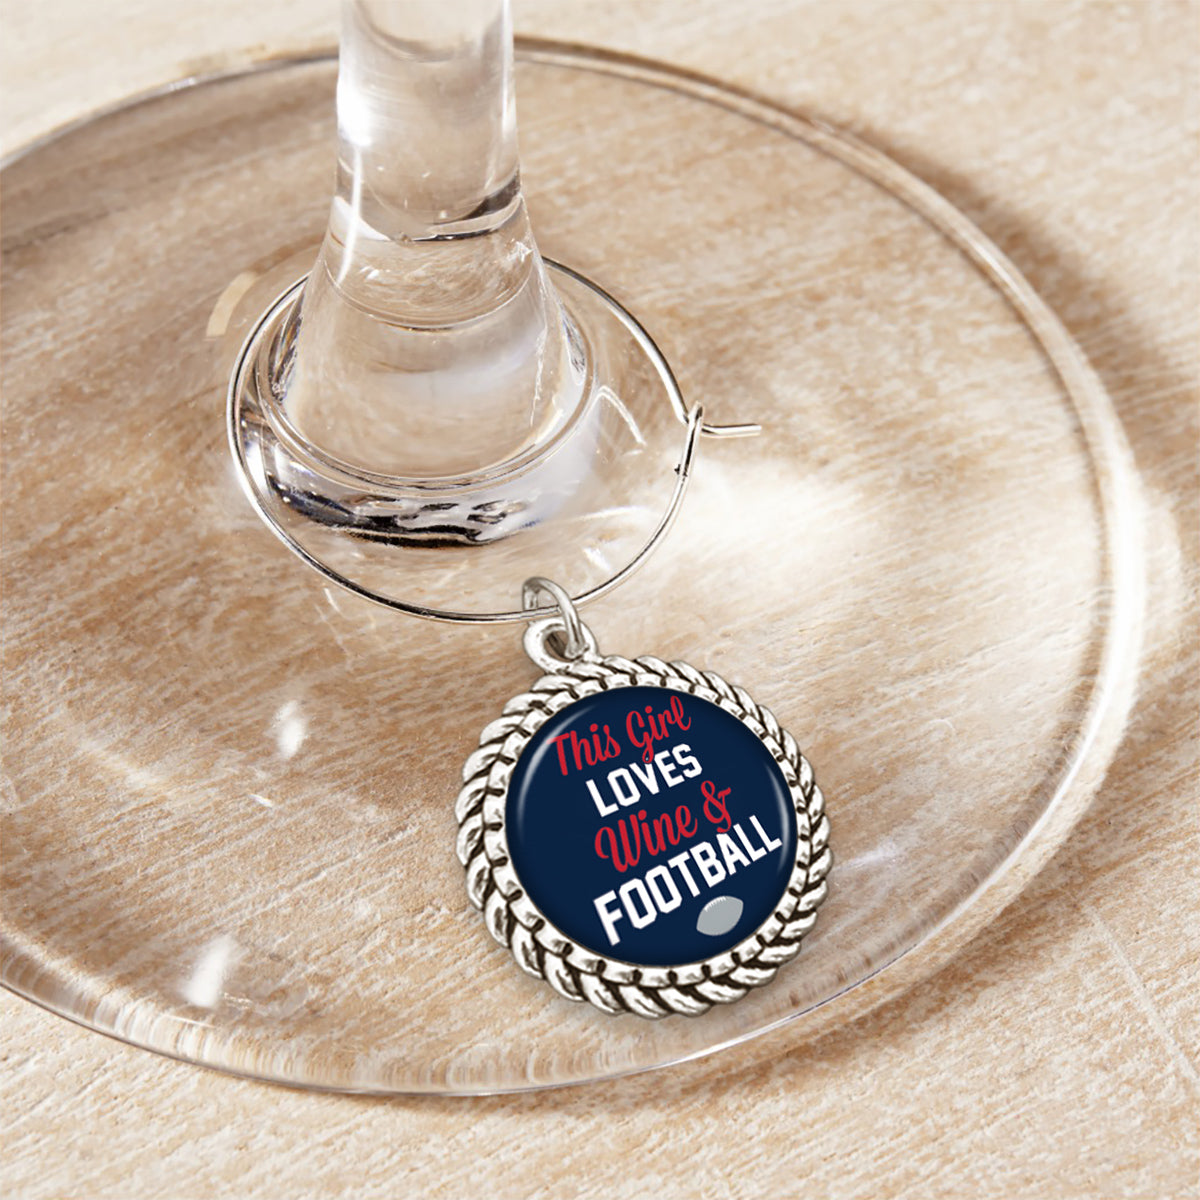 New England This Girl Loves Wine & Football Wine Glass Charm